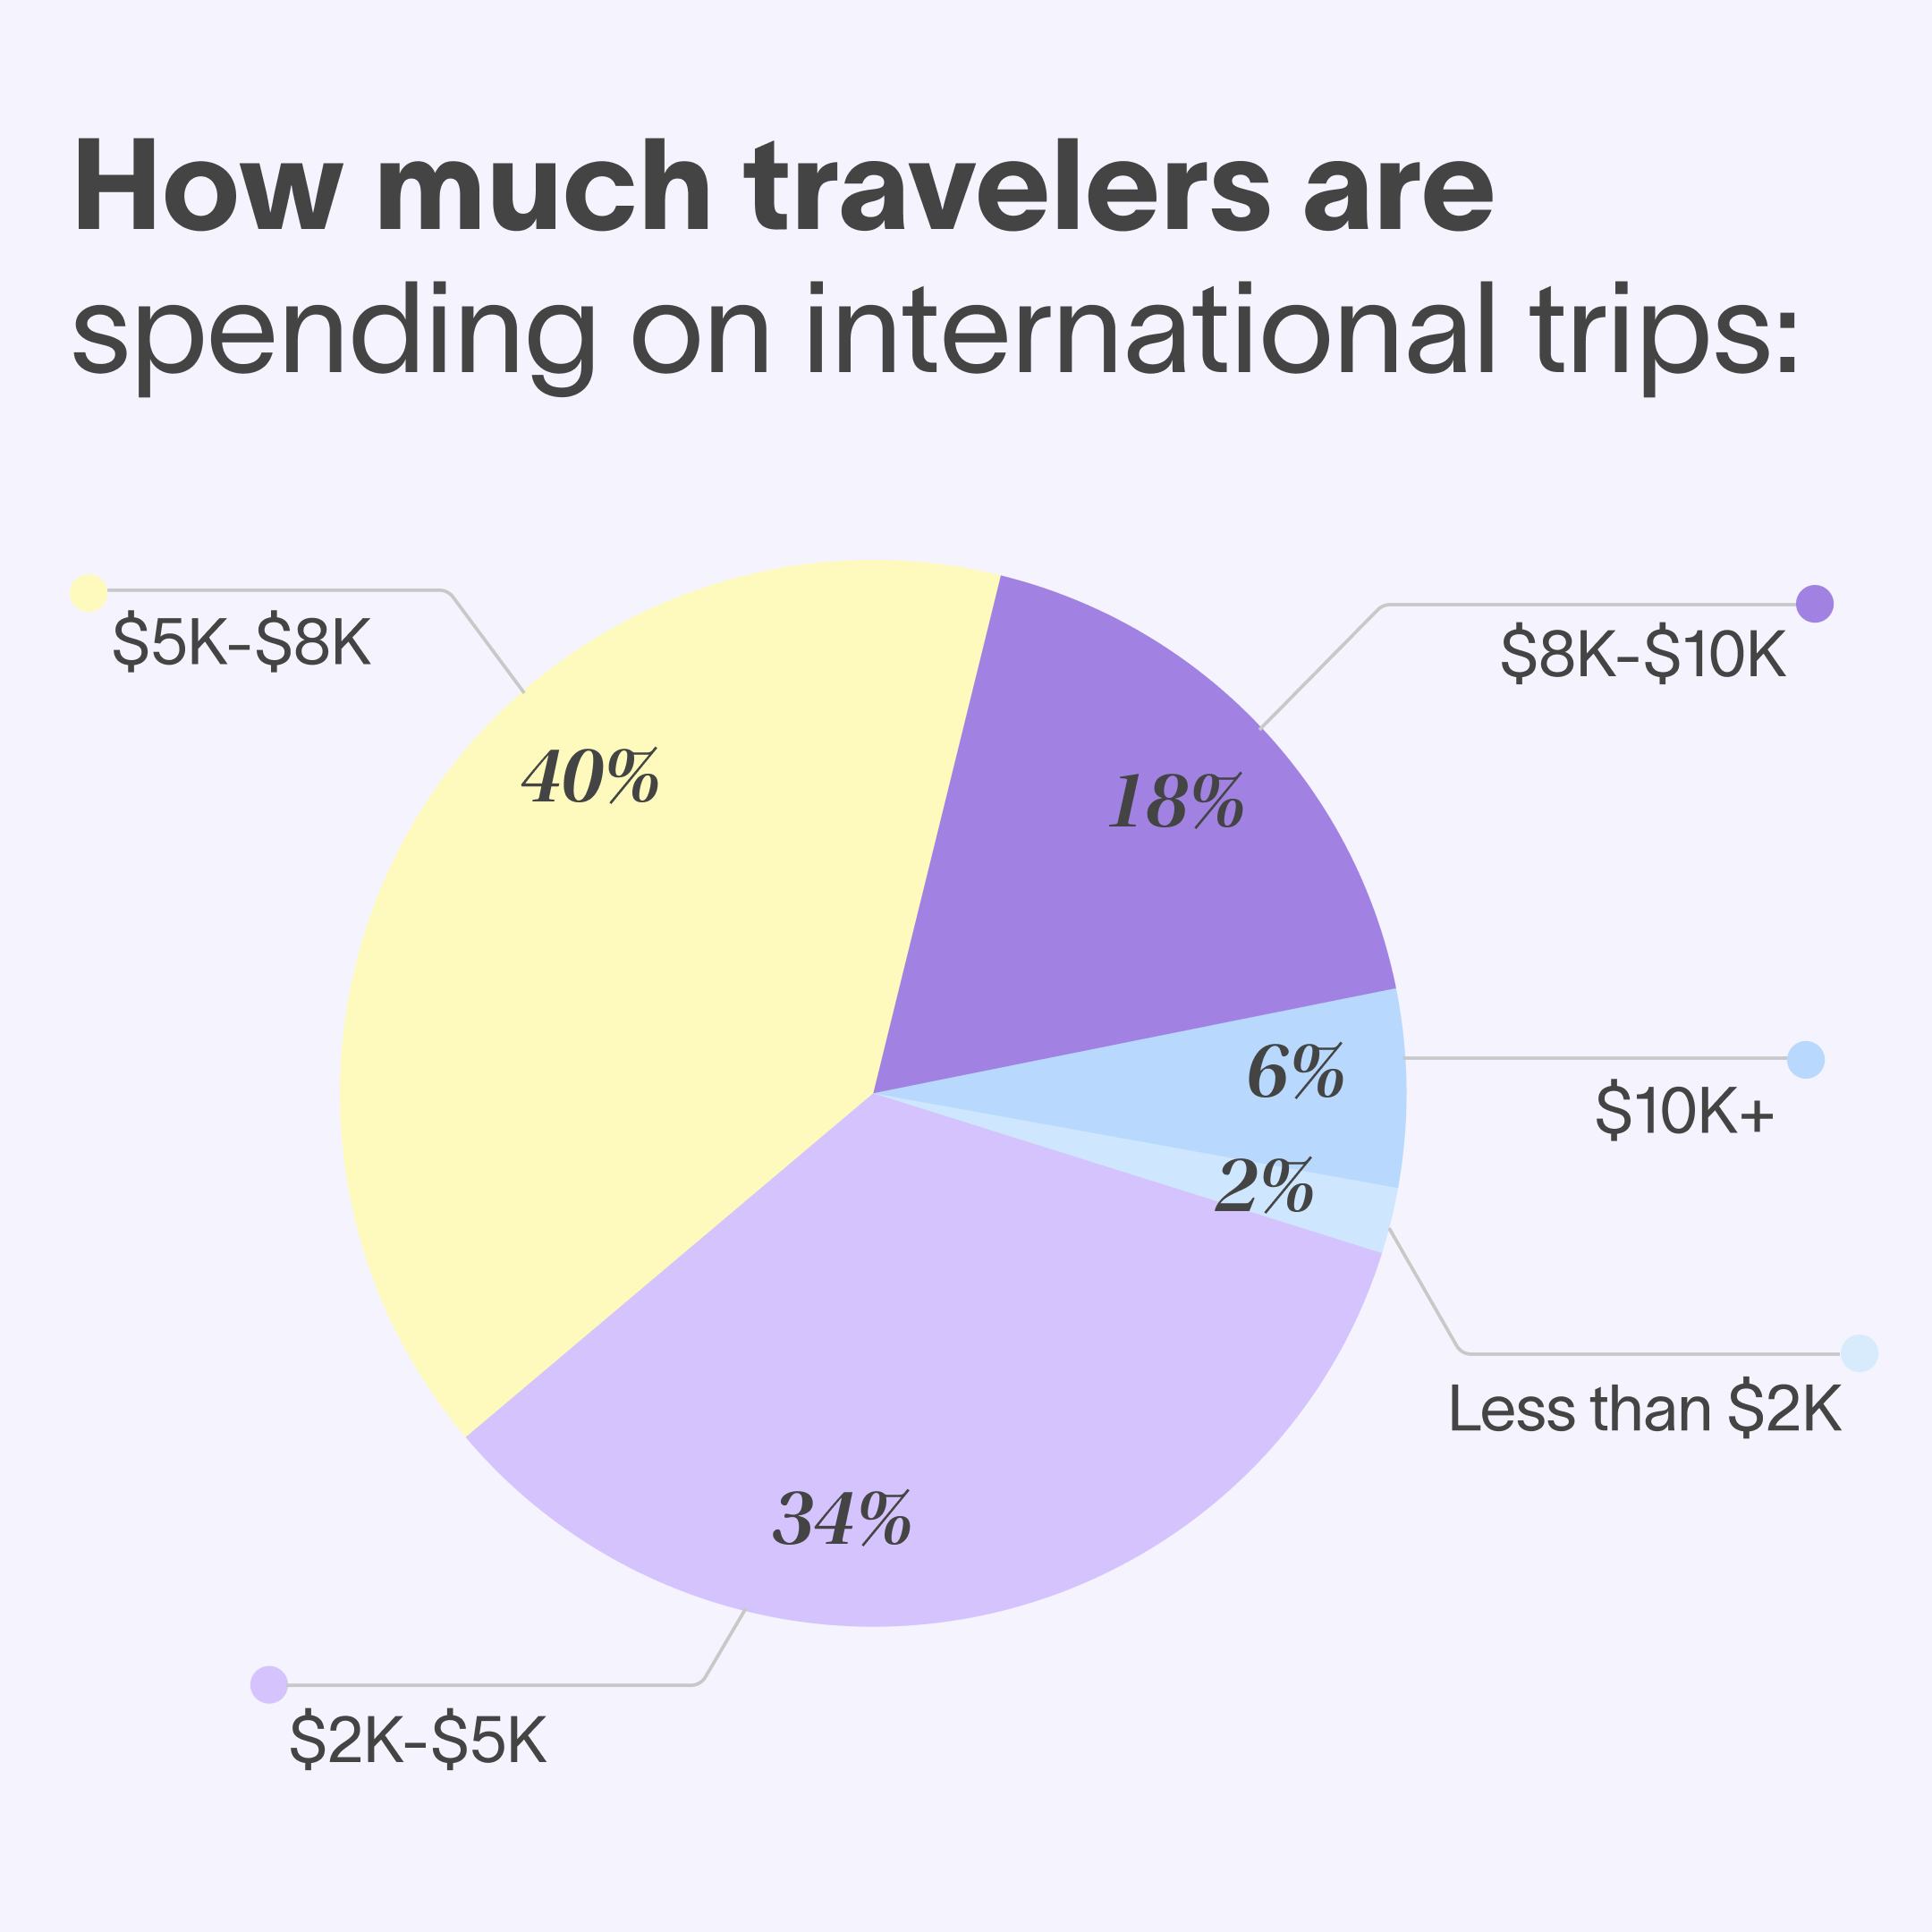 How much travelers are spending on international trips pie graph